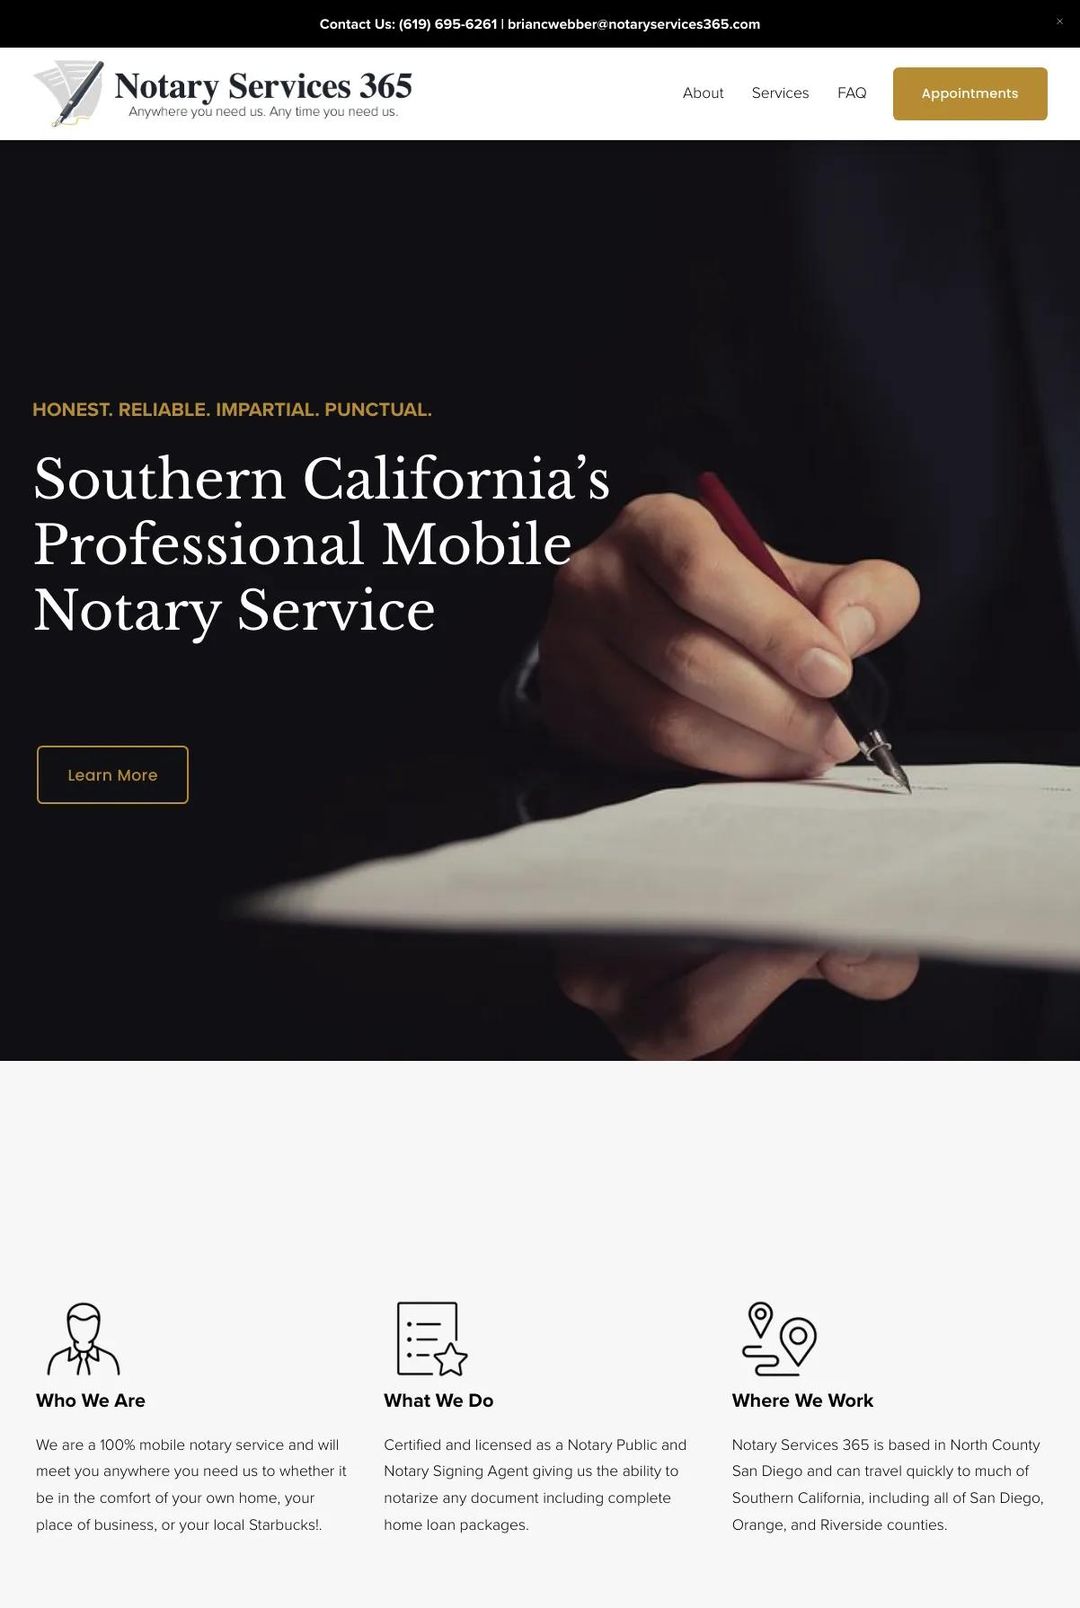 Screenshot 1 of Notary Services 365 (Example Squarespace Notary Website)